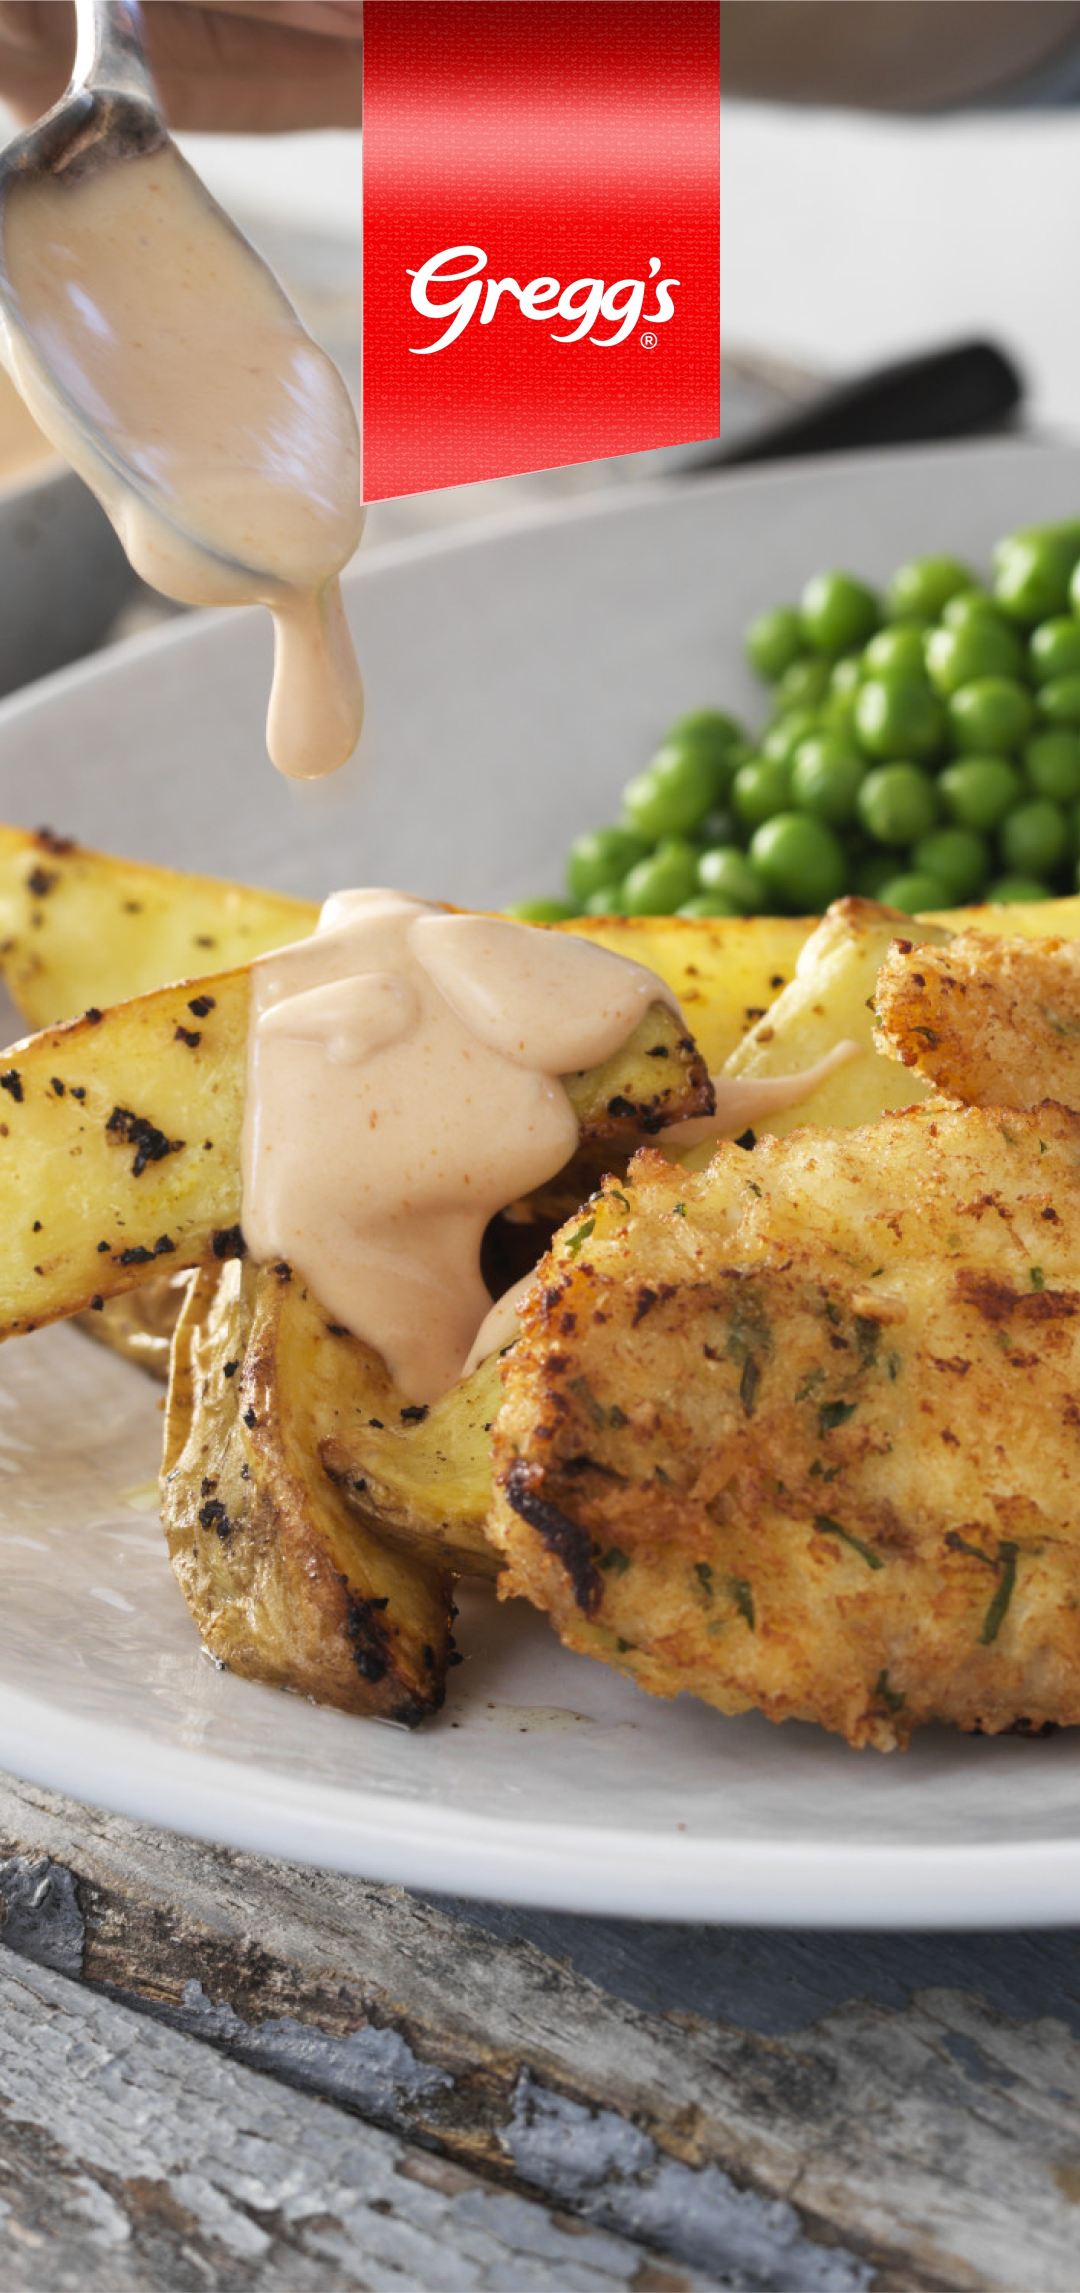 A spoon drizzling a creamy sauce over a plate of chicken, potatoes, and peas.